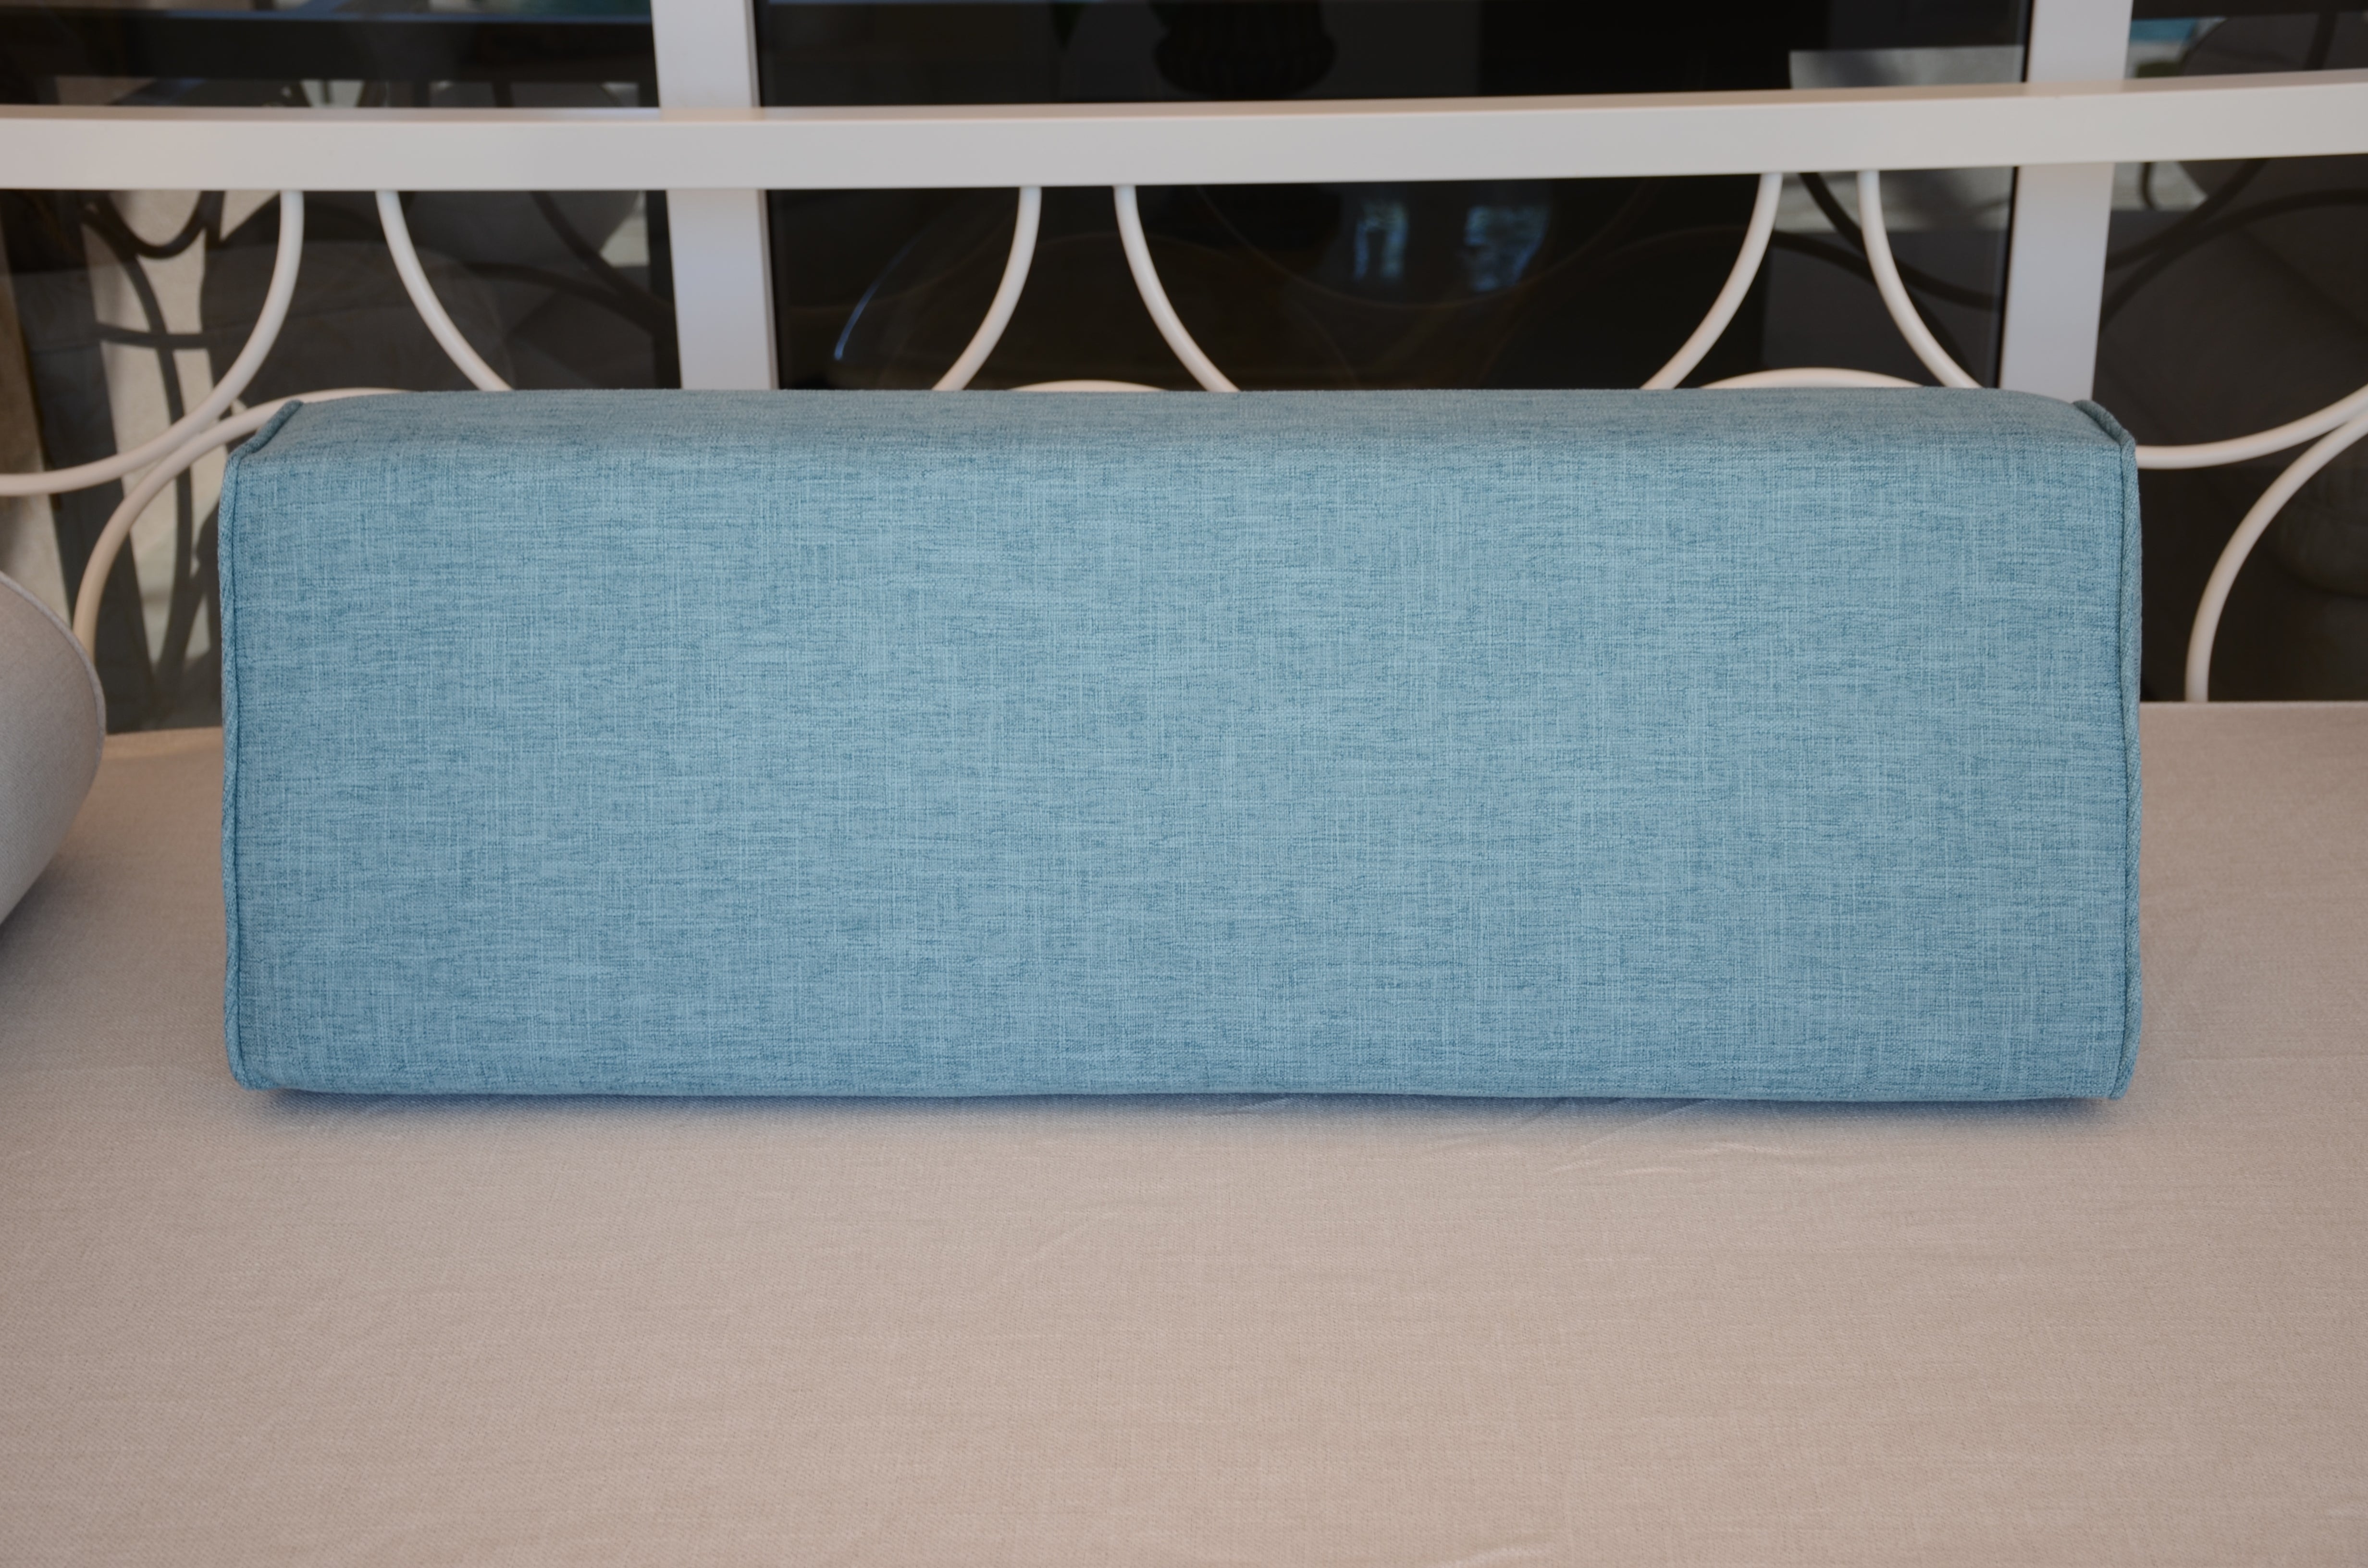 Wedge Bolster Cover (Linen-Mont-Turquoise)